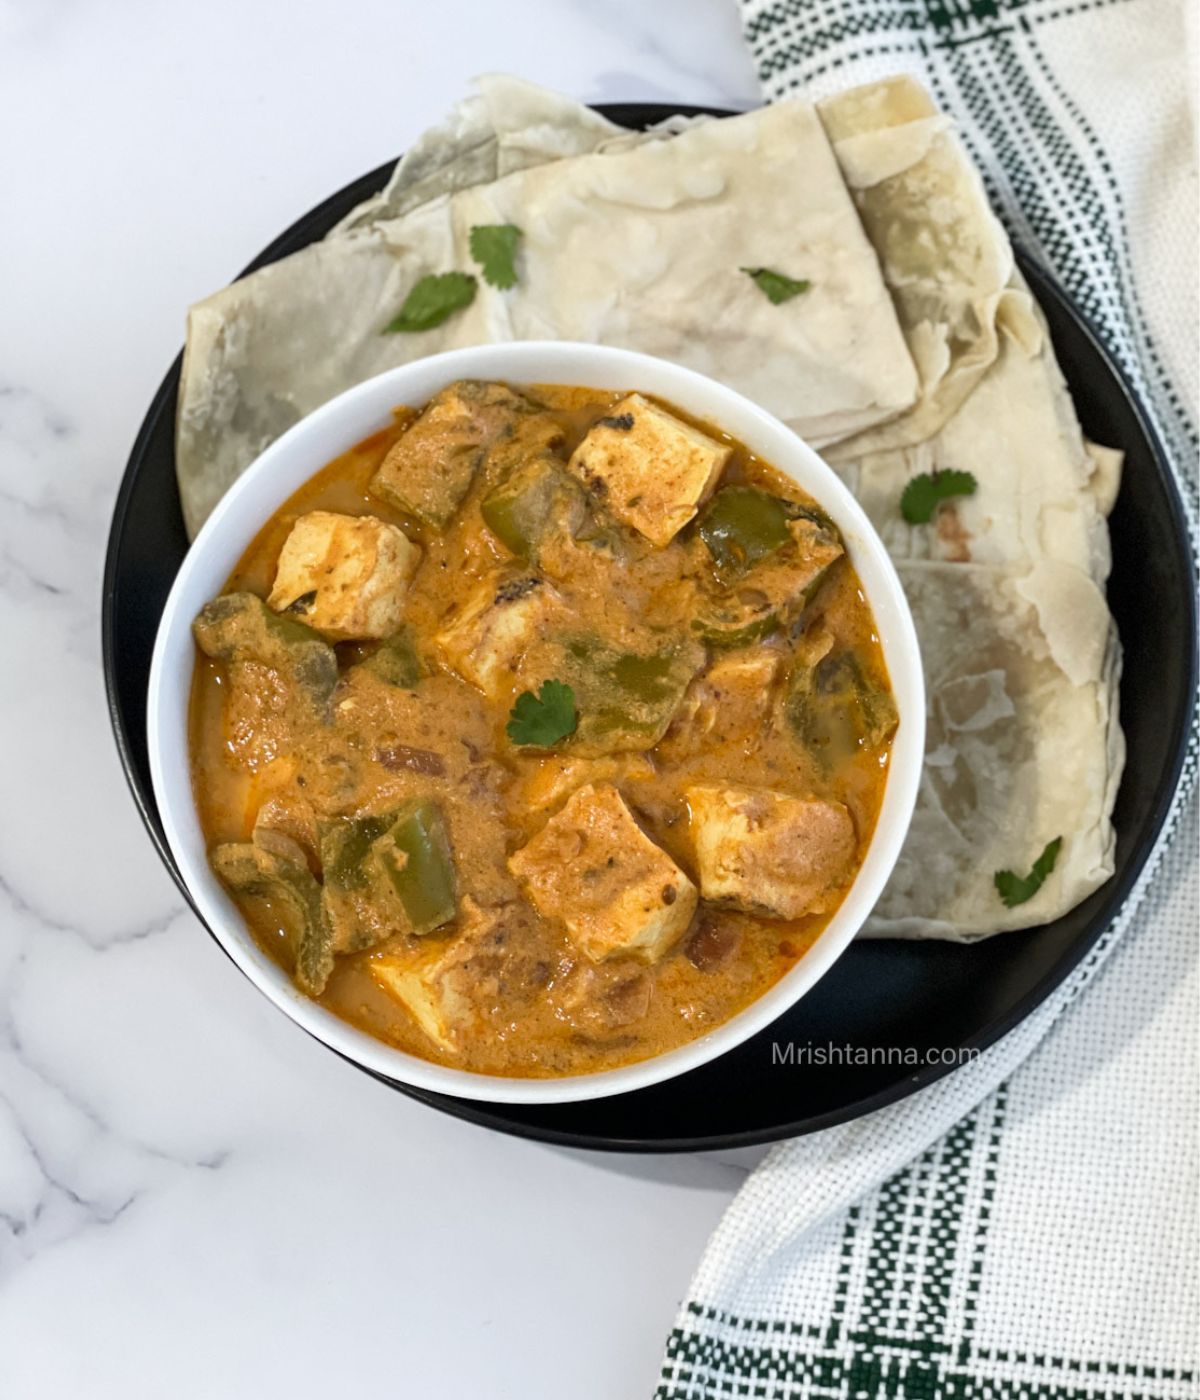 A bowl of tofu curry is on the plate with rotis.